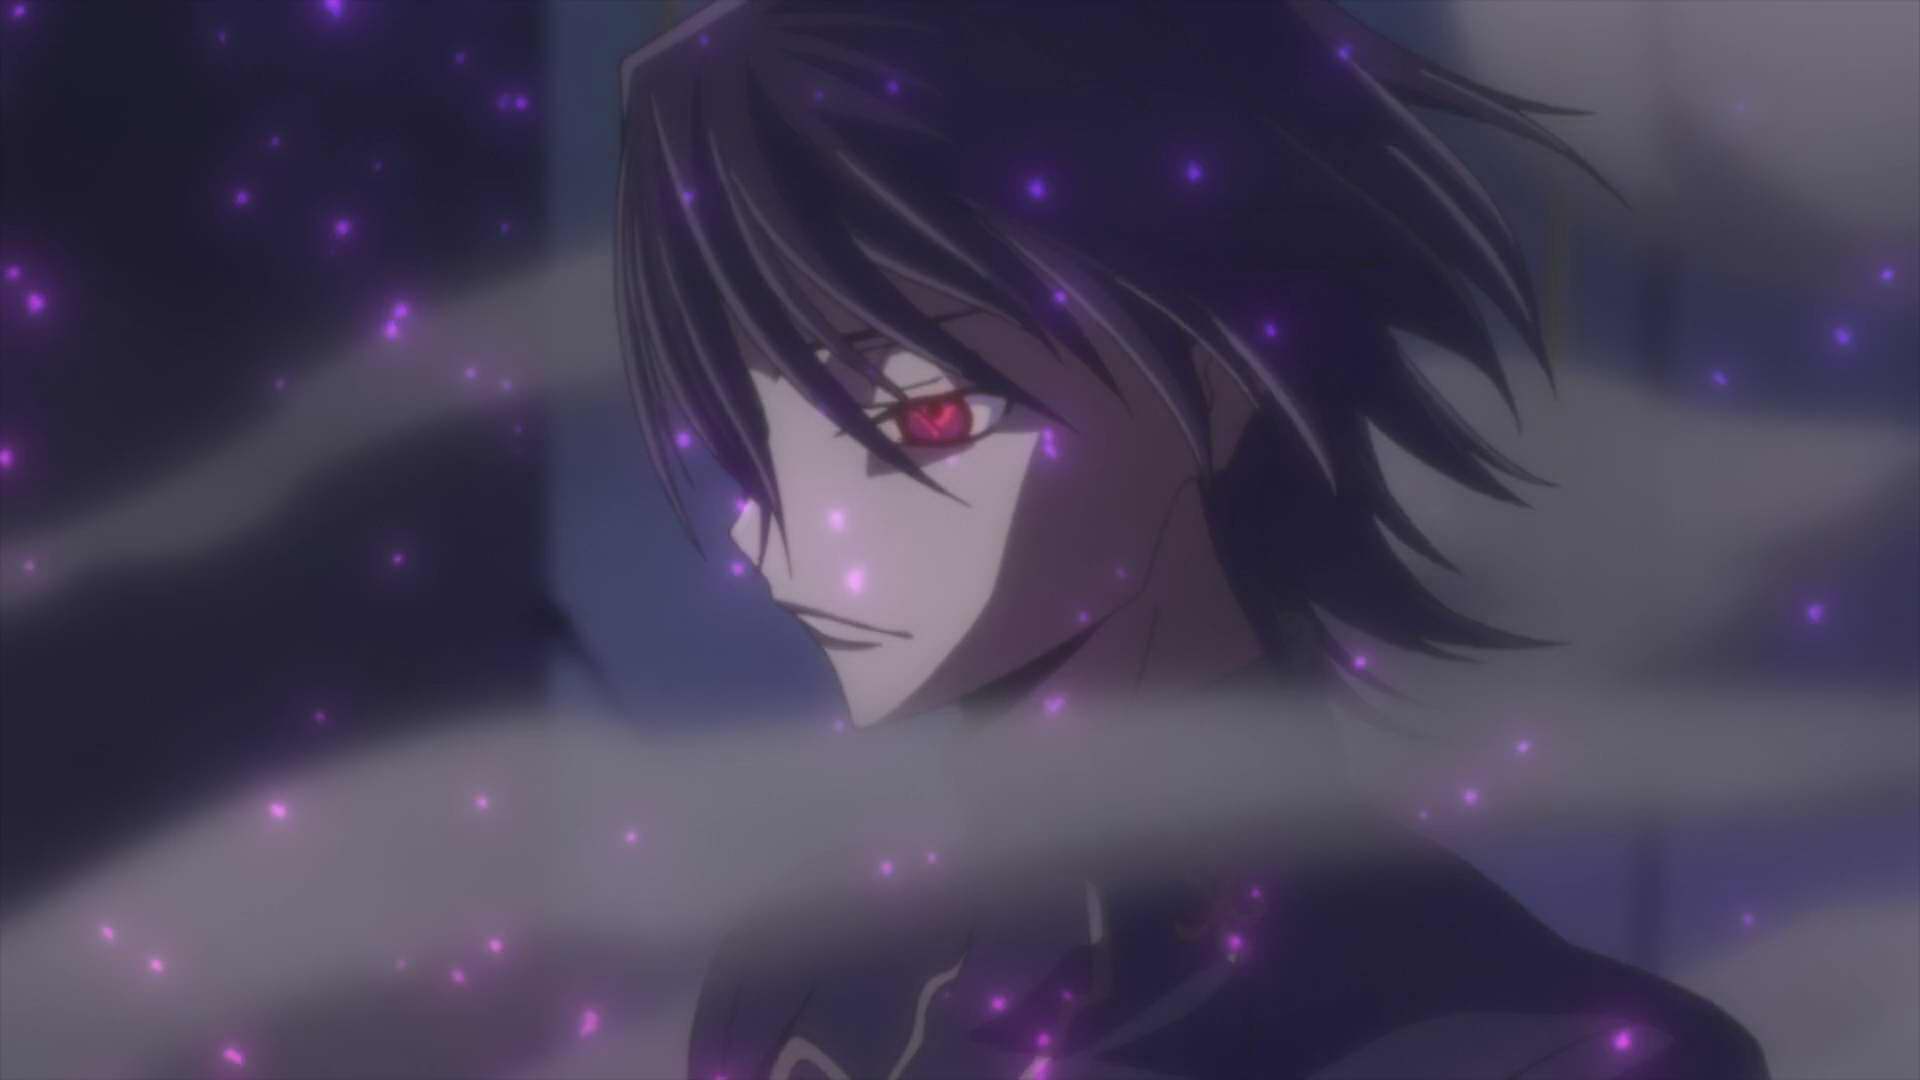 Lelouch's Emperor Blade gif ( Higher Resolution) by